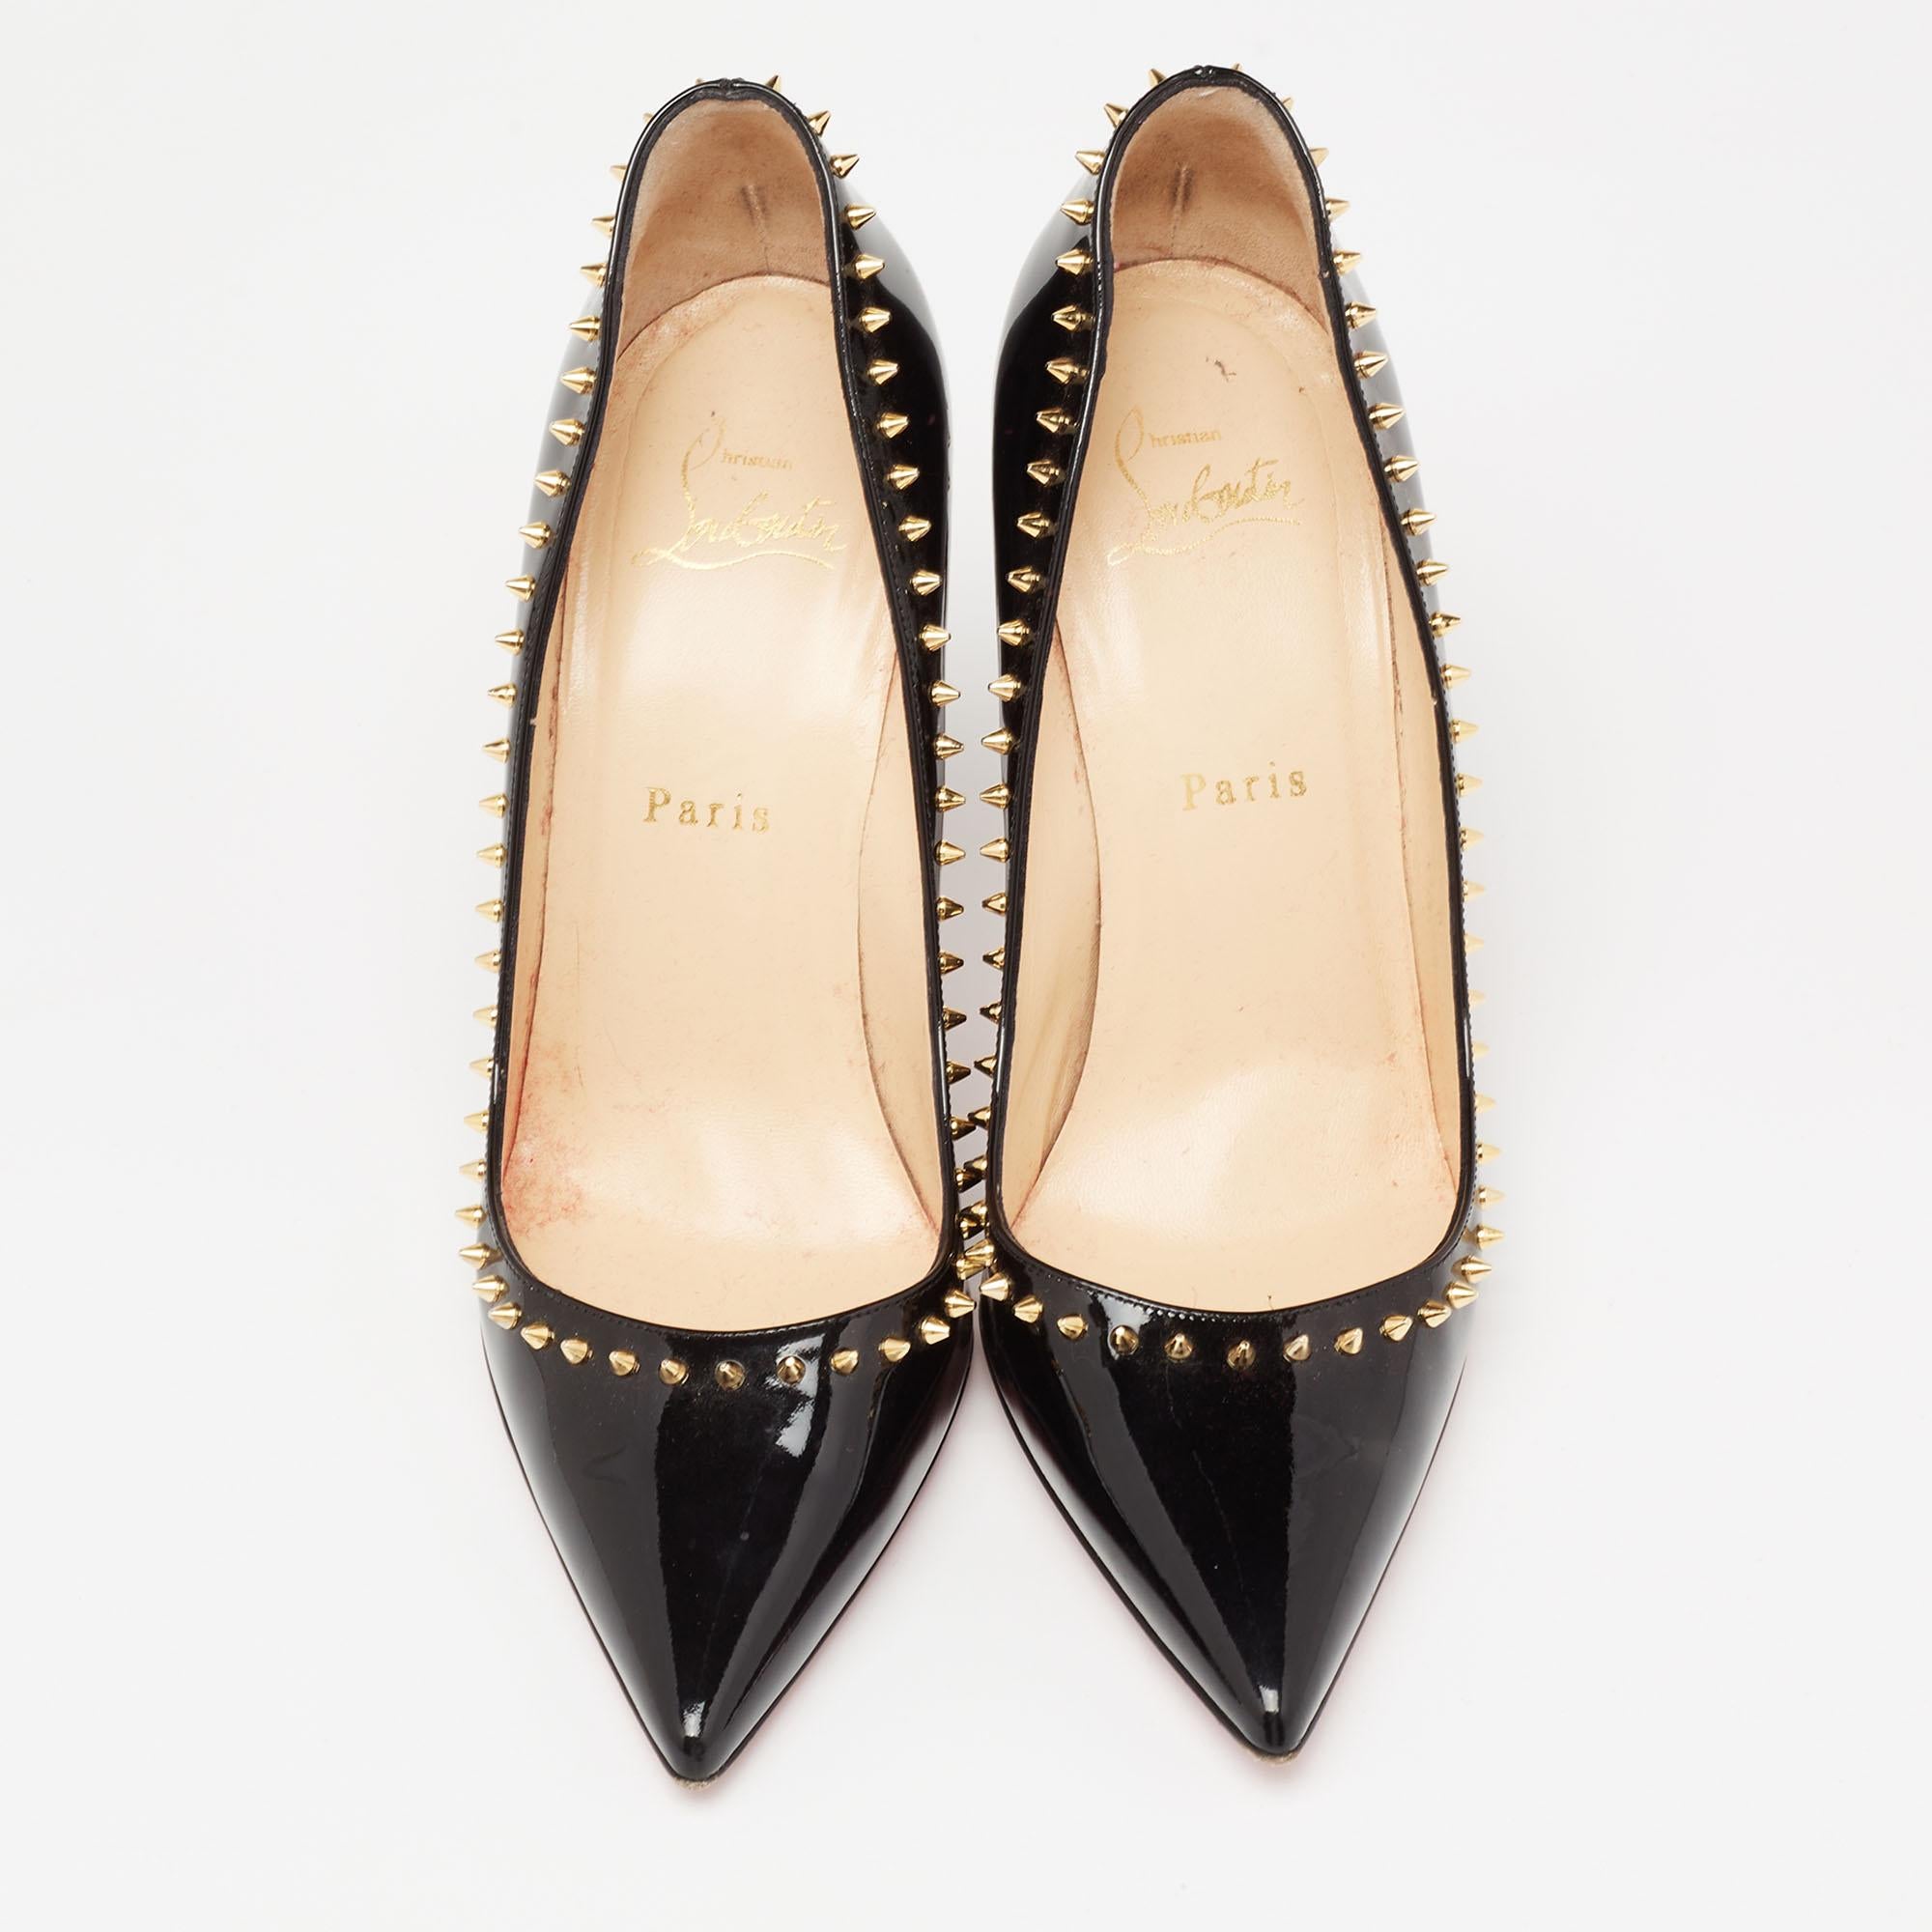 Always setting a benchmark for beautiful footwear, Christian Louboutin introduces another creation from its enormous collection. These Anjalina pumps look exclusively gorgeous with spike embellishments, pointed toes, and slim heels. Crafted with